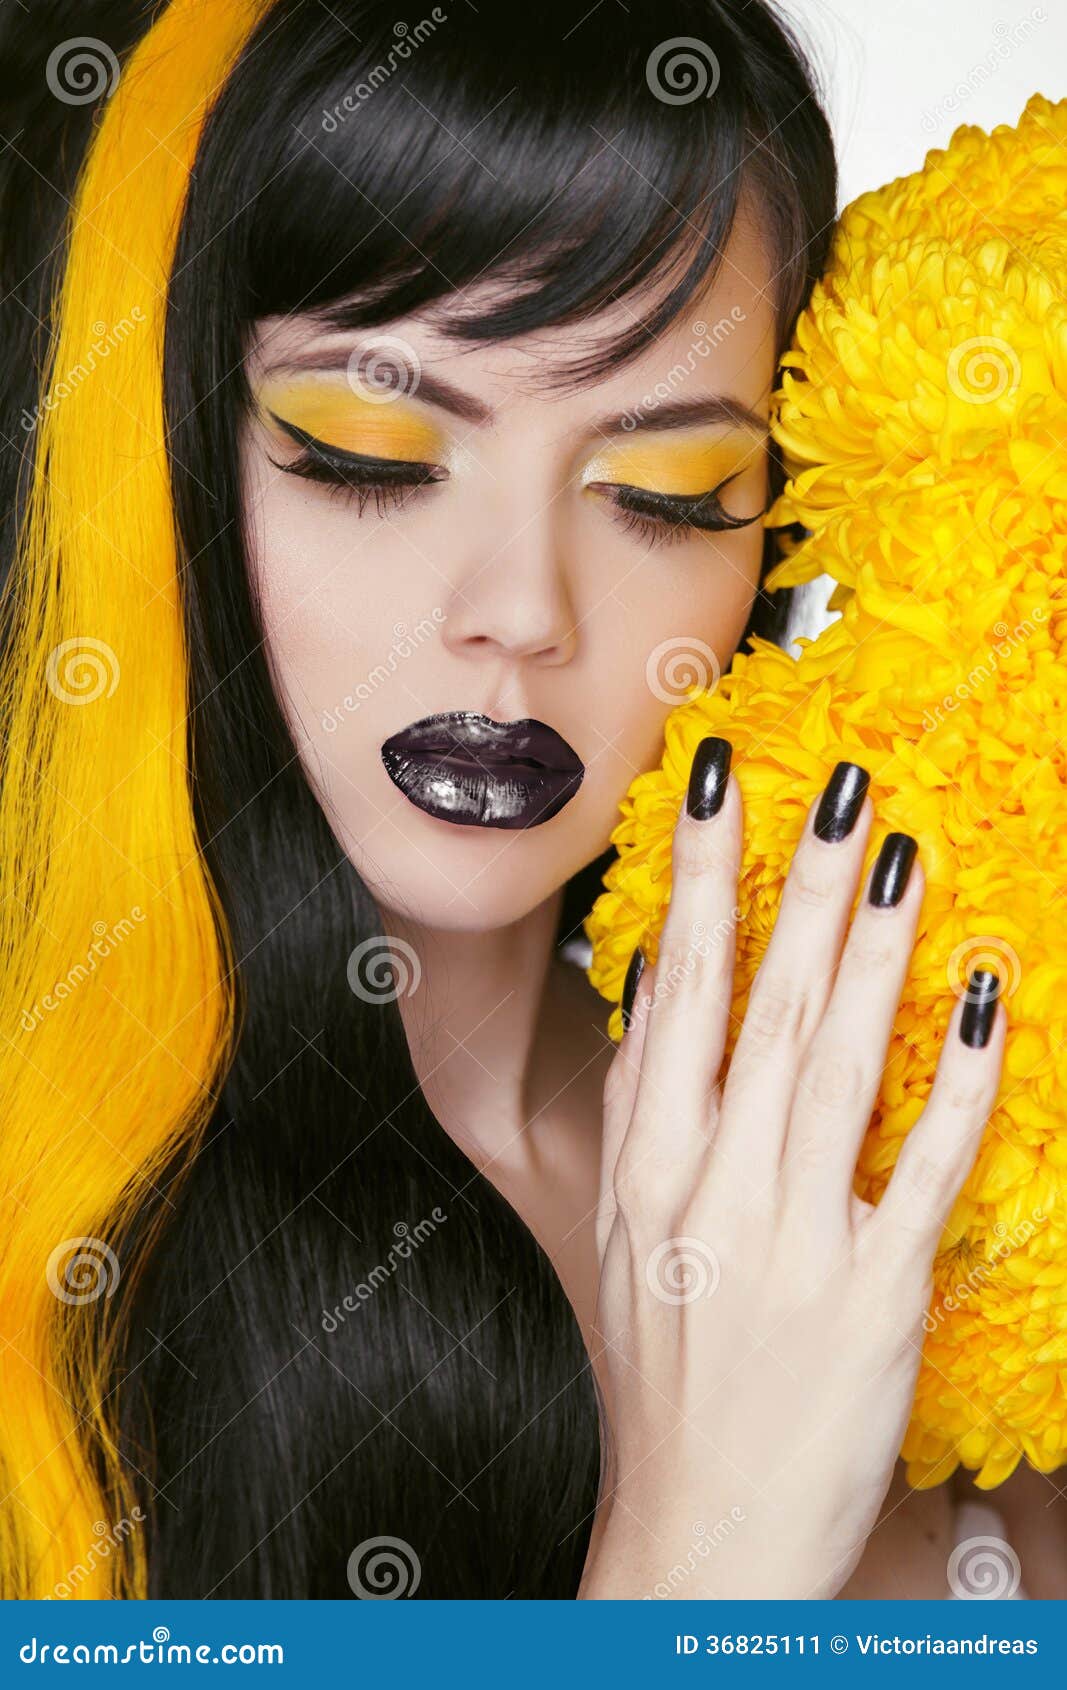 150+ Cute Emo Makeup Stock Photos, Pictures & Royalty-Free Images